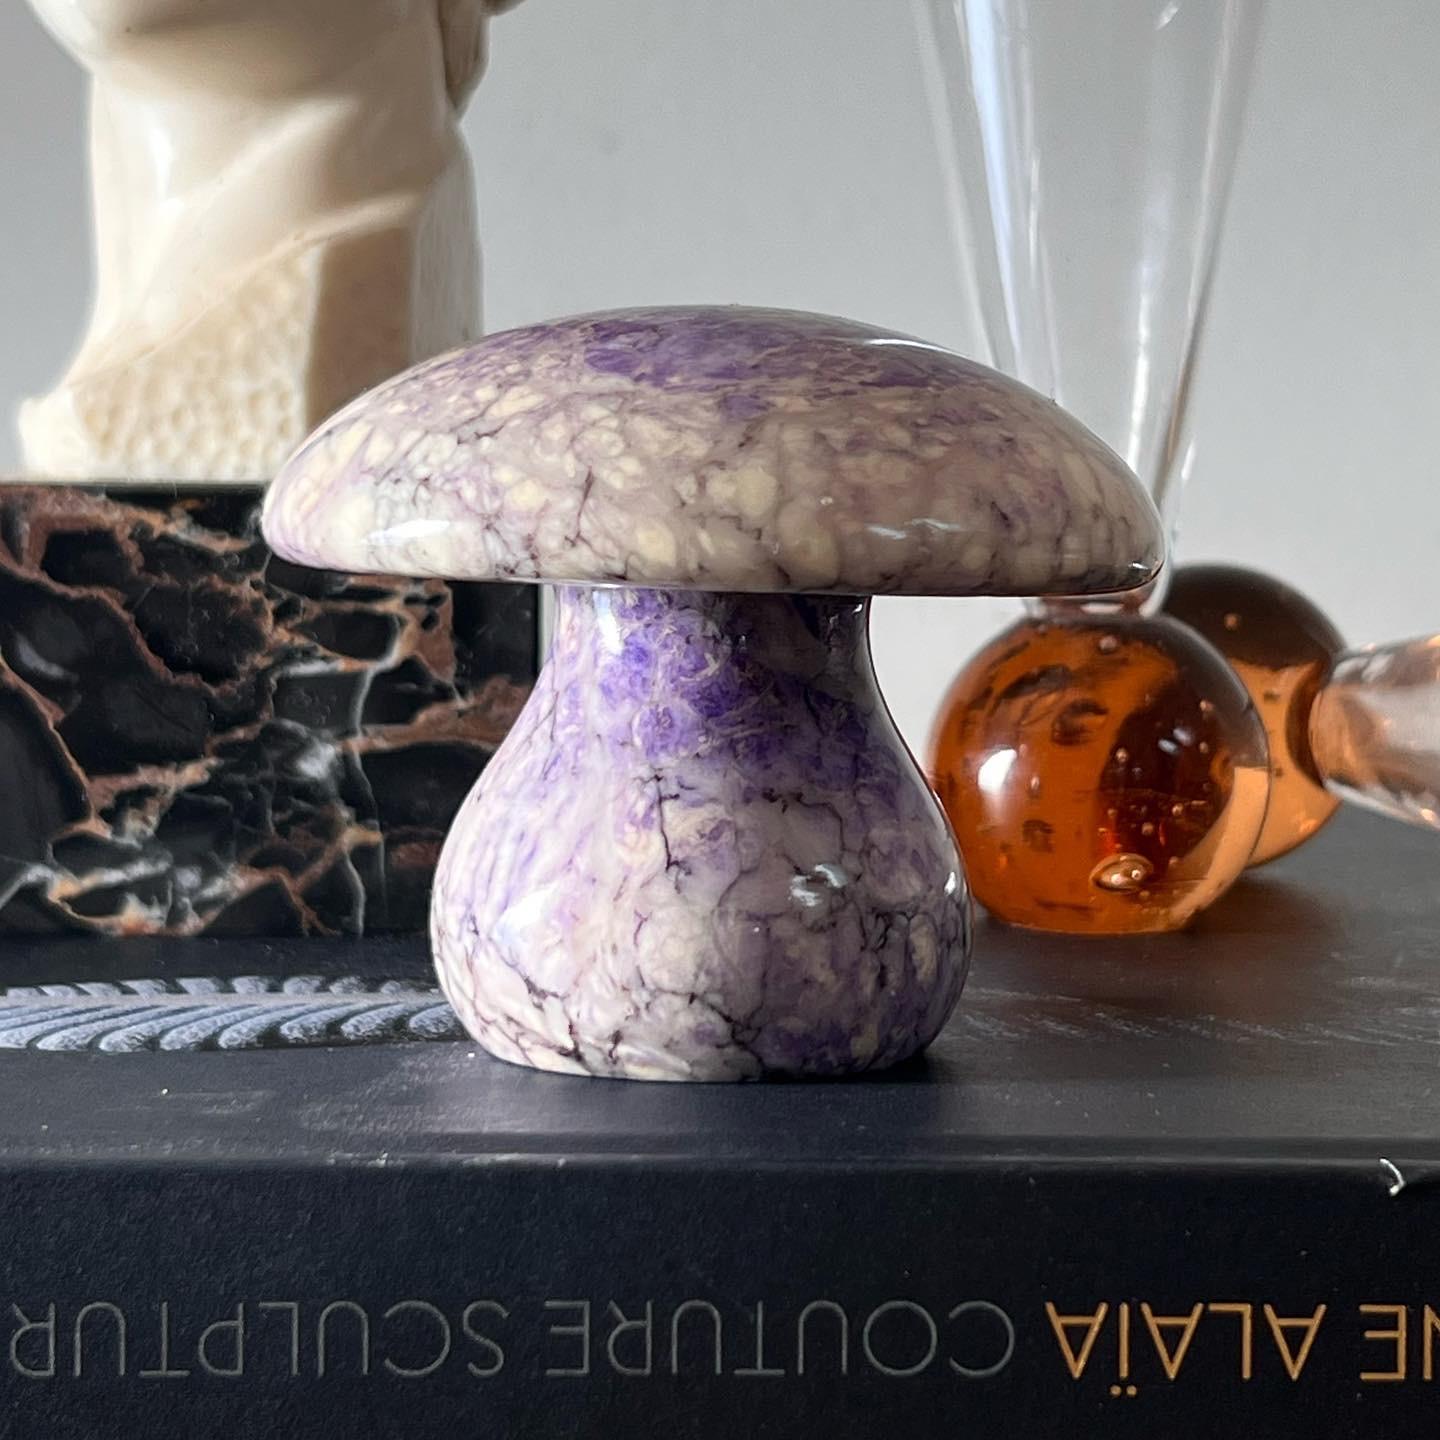 A vintage Italian marble mushroom objet d’art / paperweight in a stunningly rare lavender purple tone, hand-carved in Italy 1960s. Minor signs of wear consistent with age but overall good condition. Pick up in central west Los Angeles or worldwide